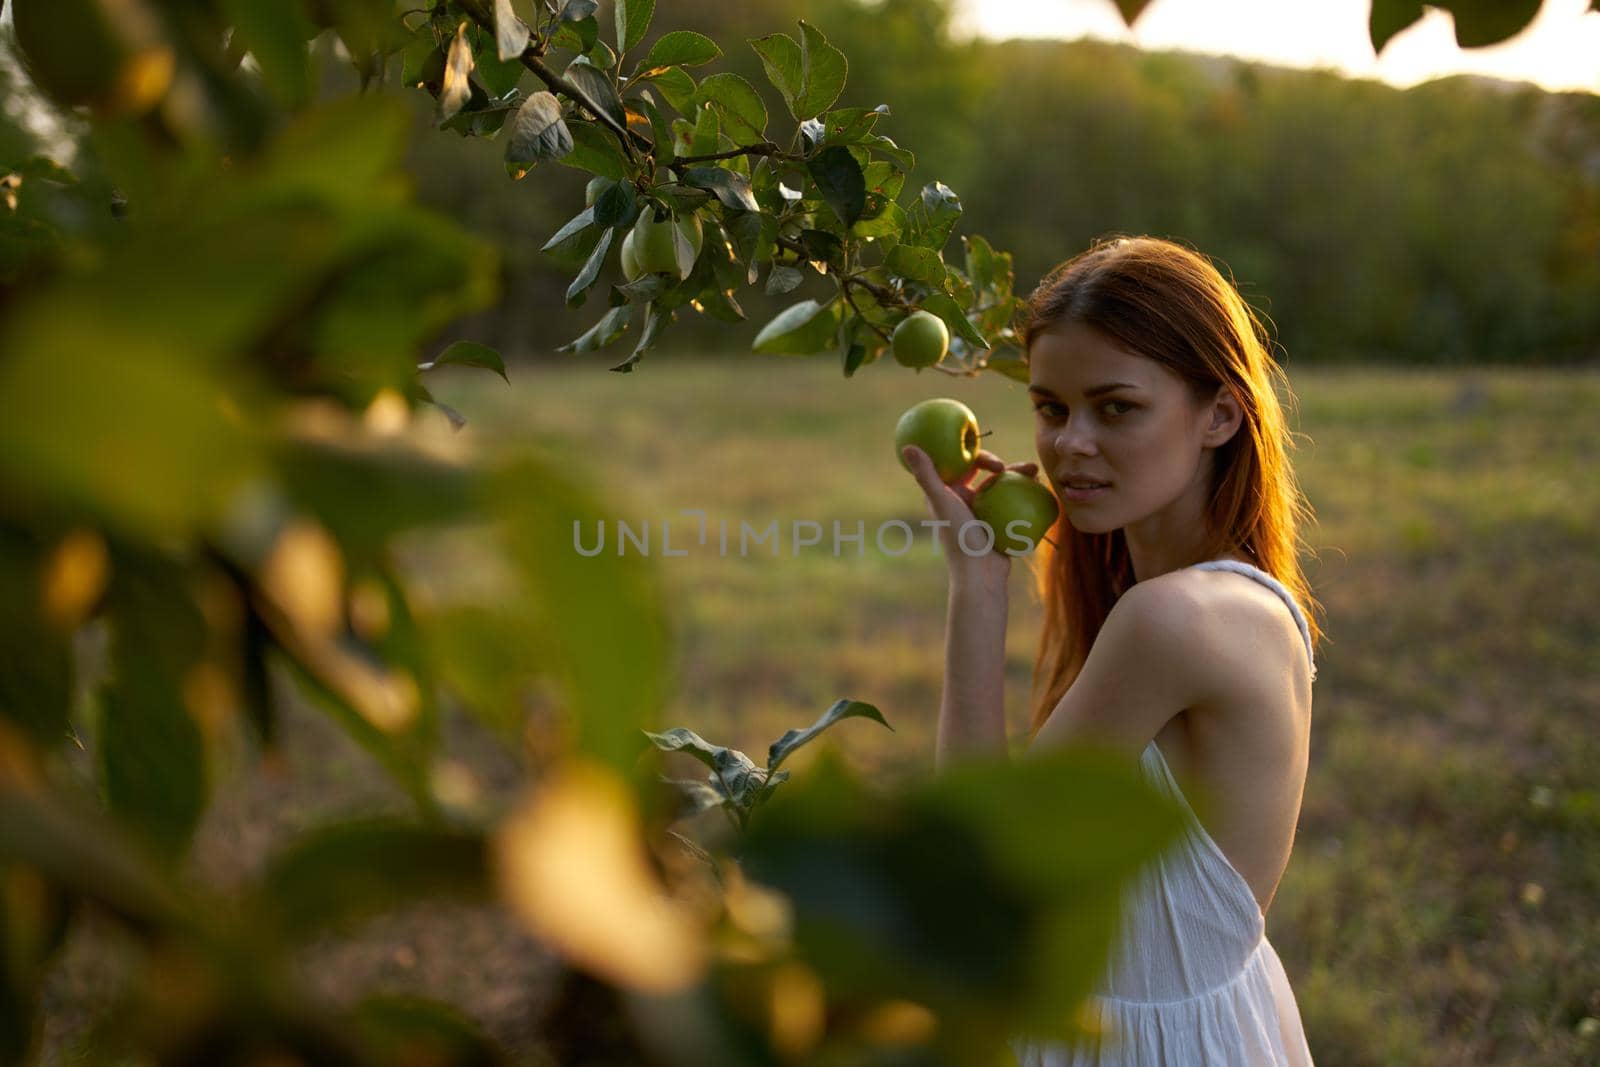 Woman in white dress picks apples from a tree in a nature field. High quality photo